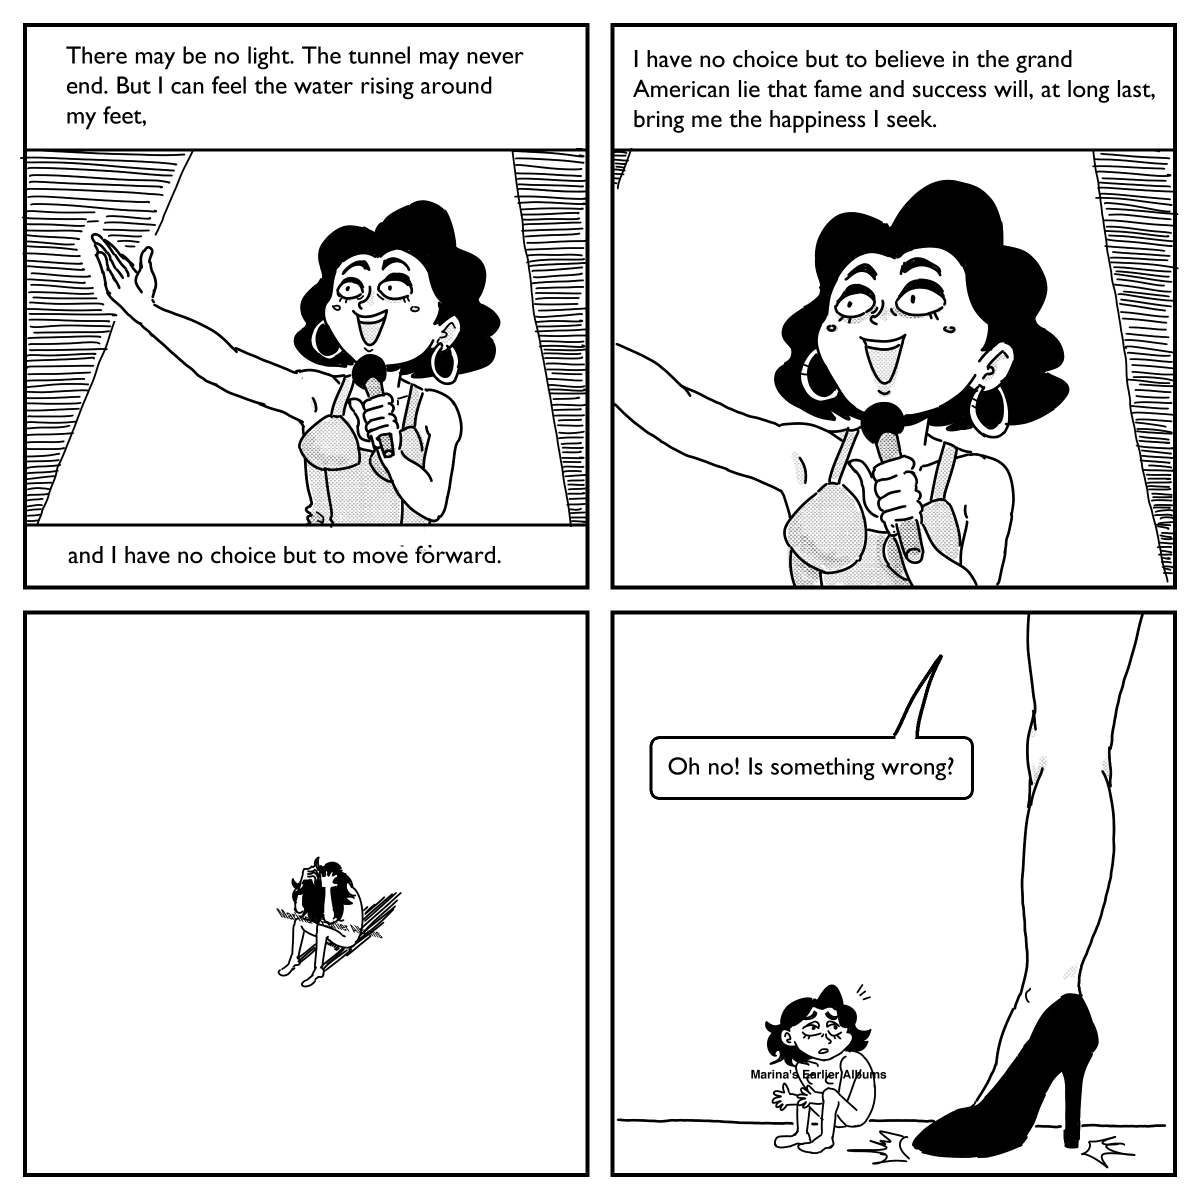 In honor of the Electra Heart deluxe rerelease that just dropped, here's a deluxe repost of my Marina and the Diamonds comic from last year 